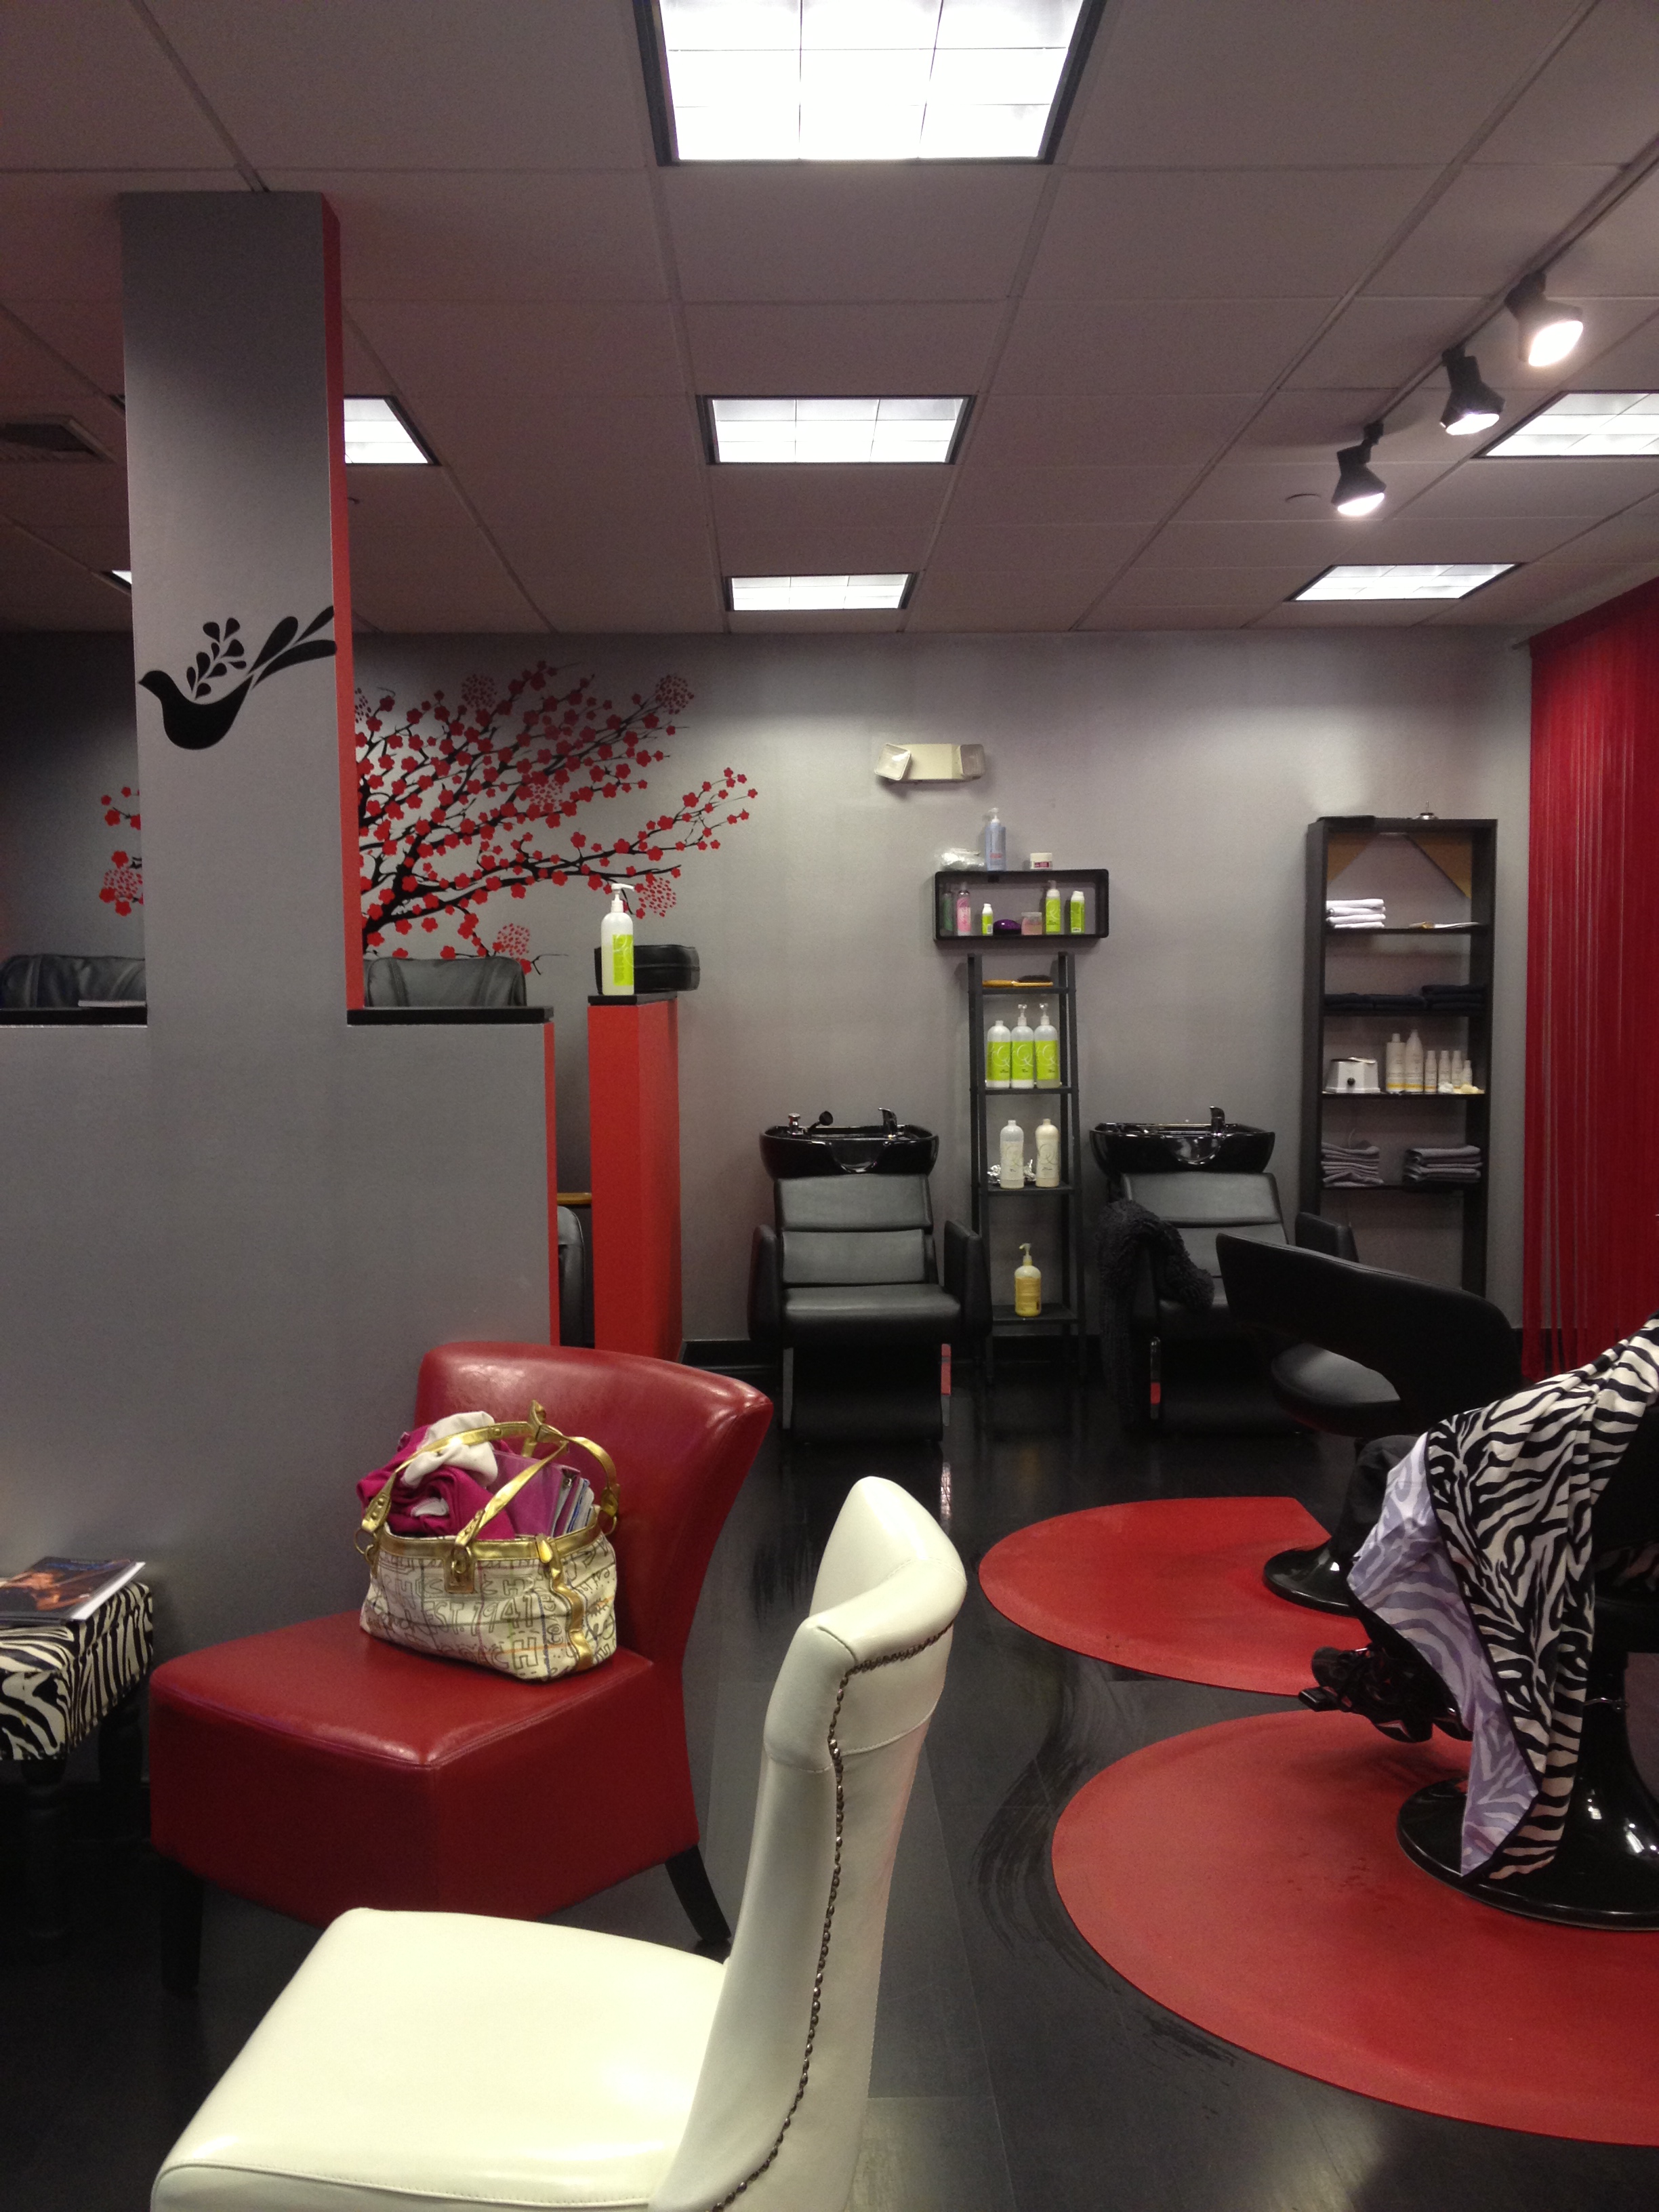 natural hair salon in new haven ct